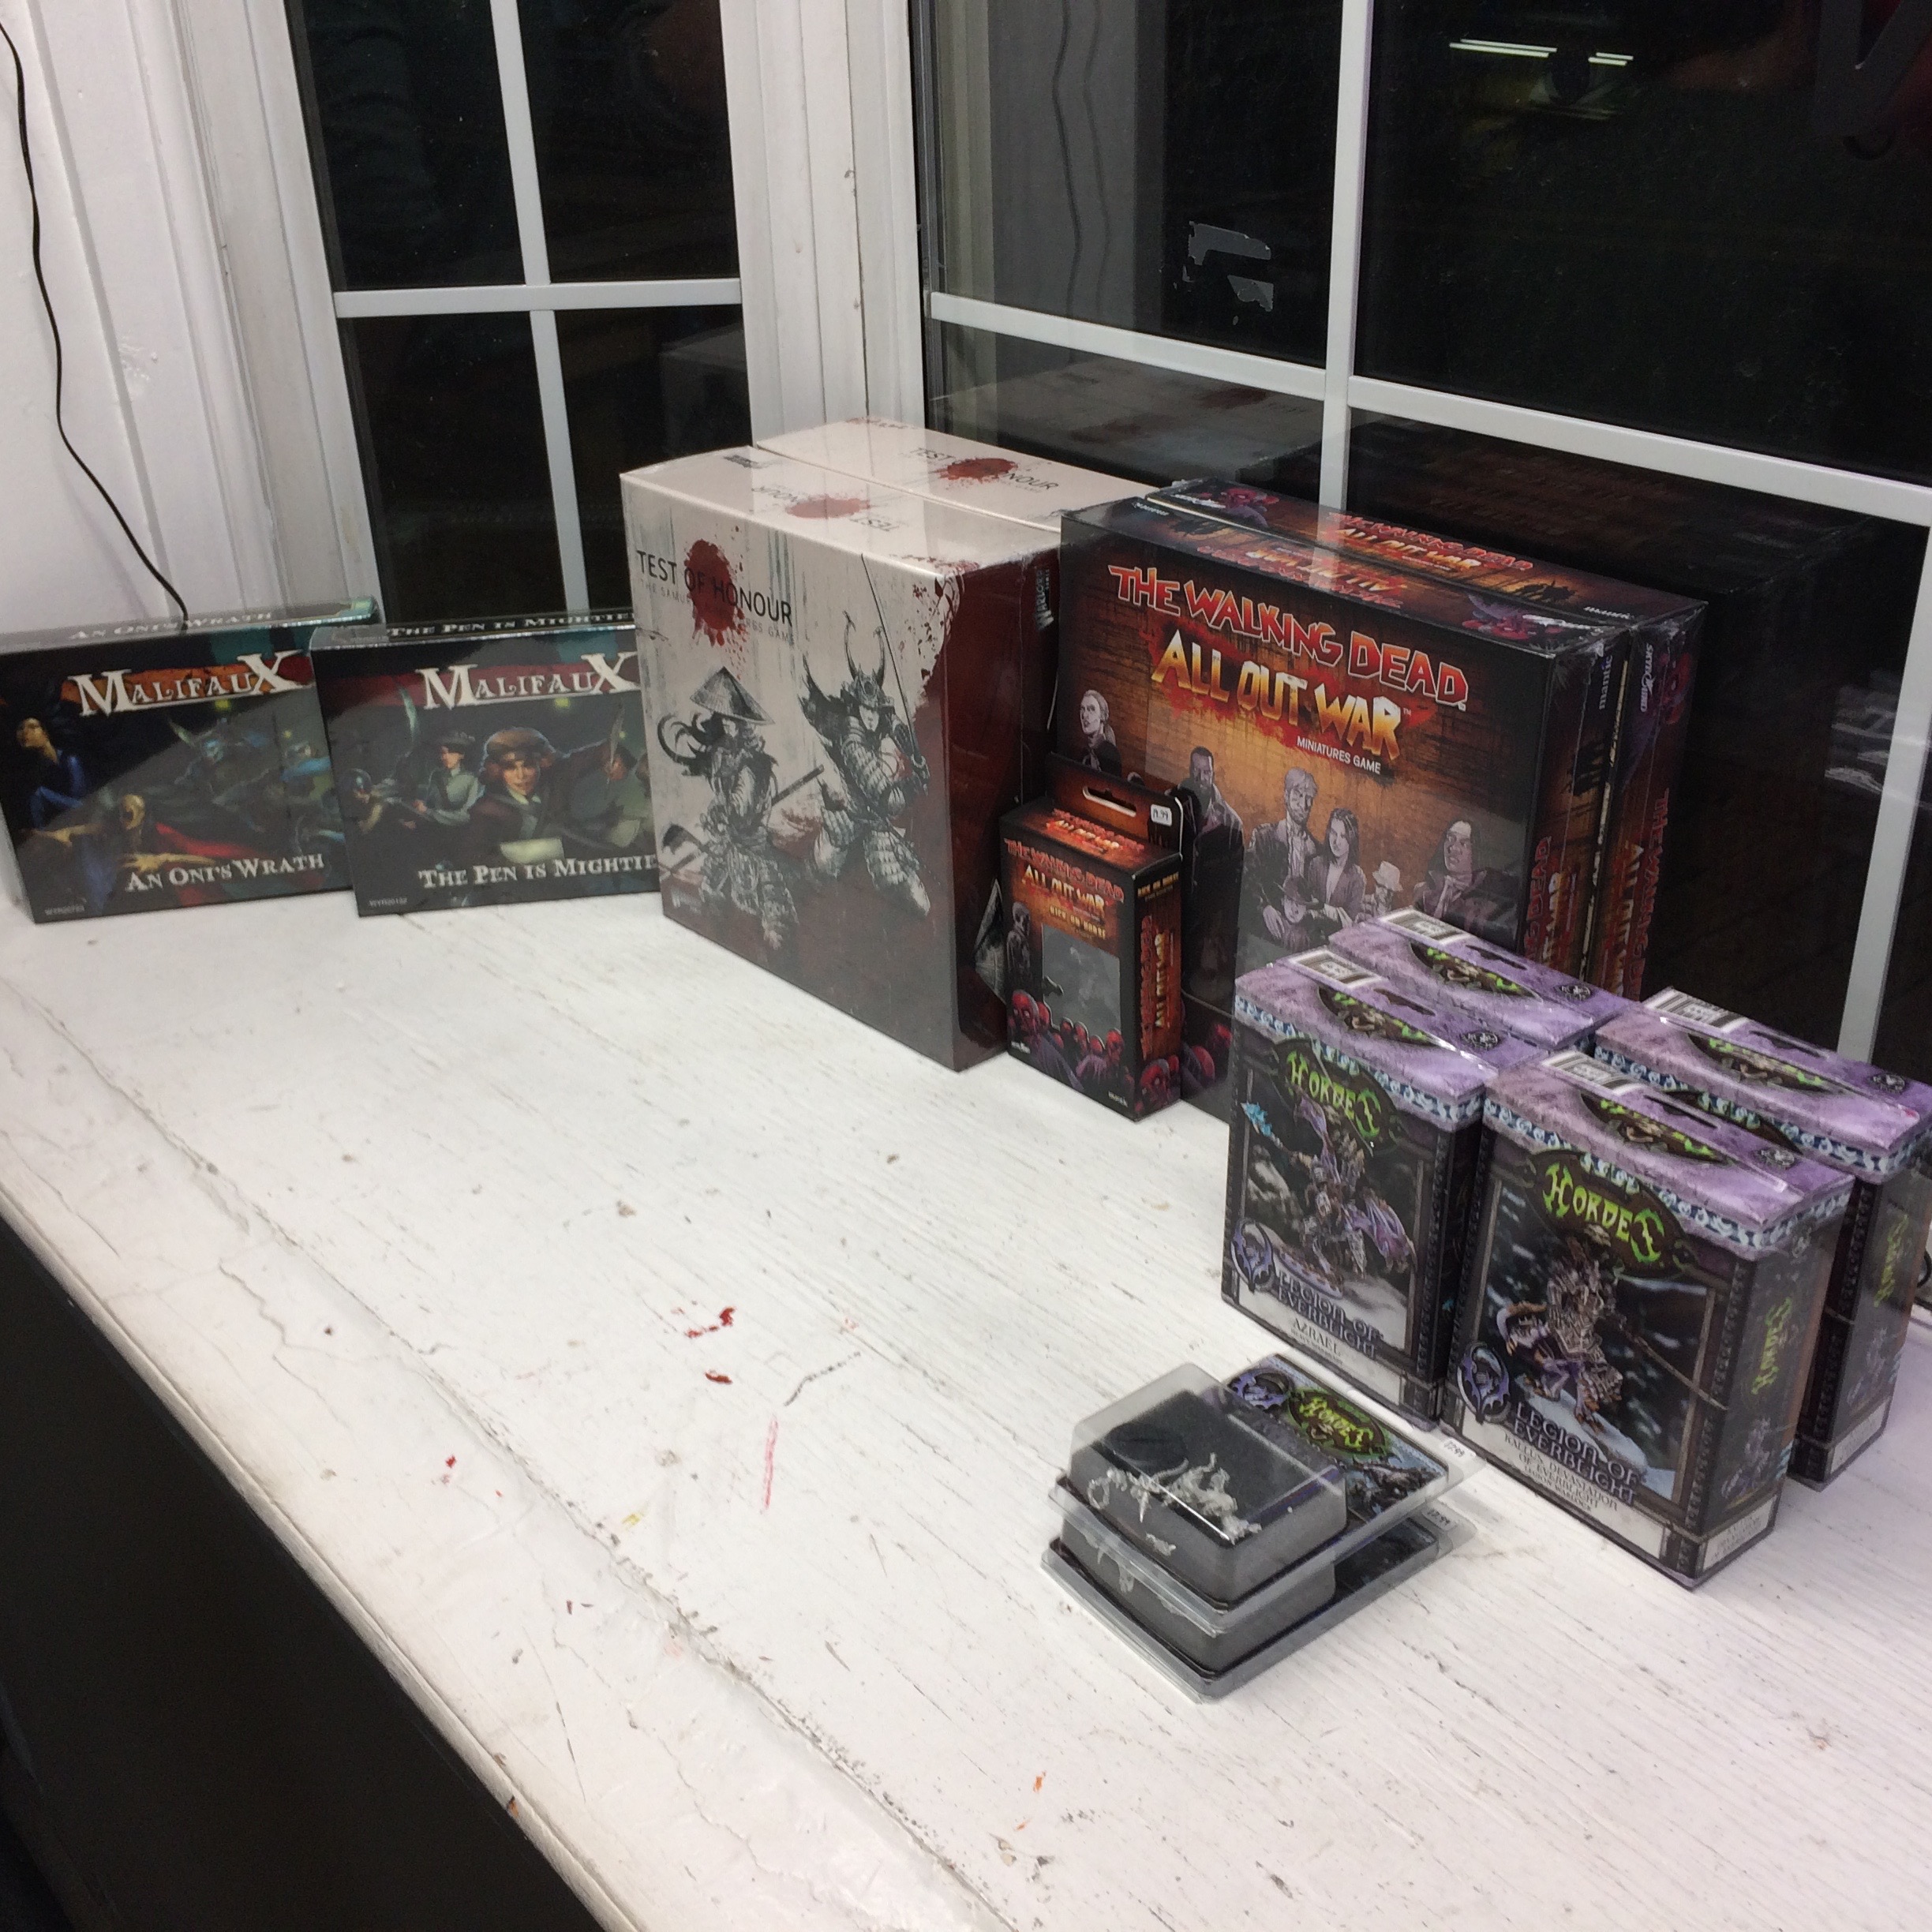 Everblight, Malifaux, and The Walking Dead